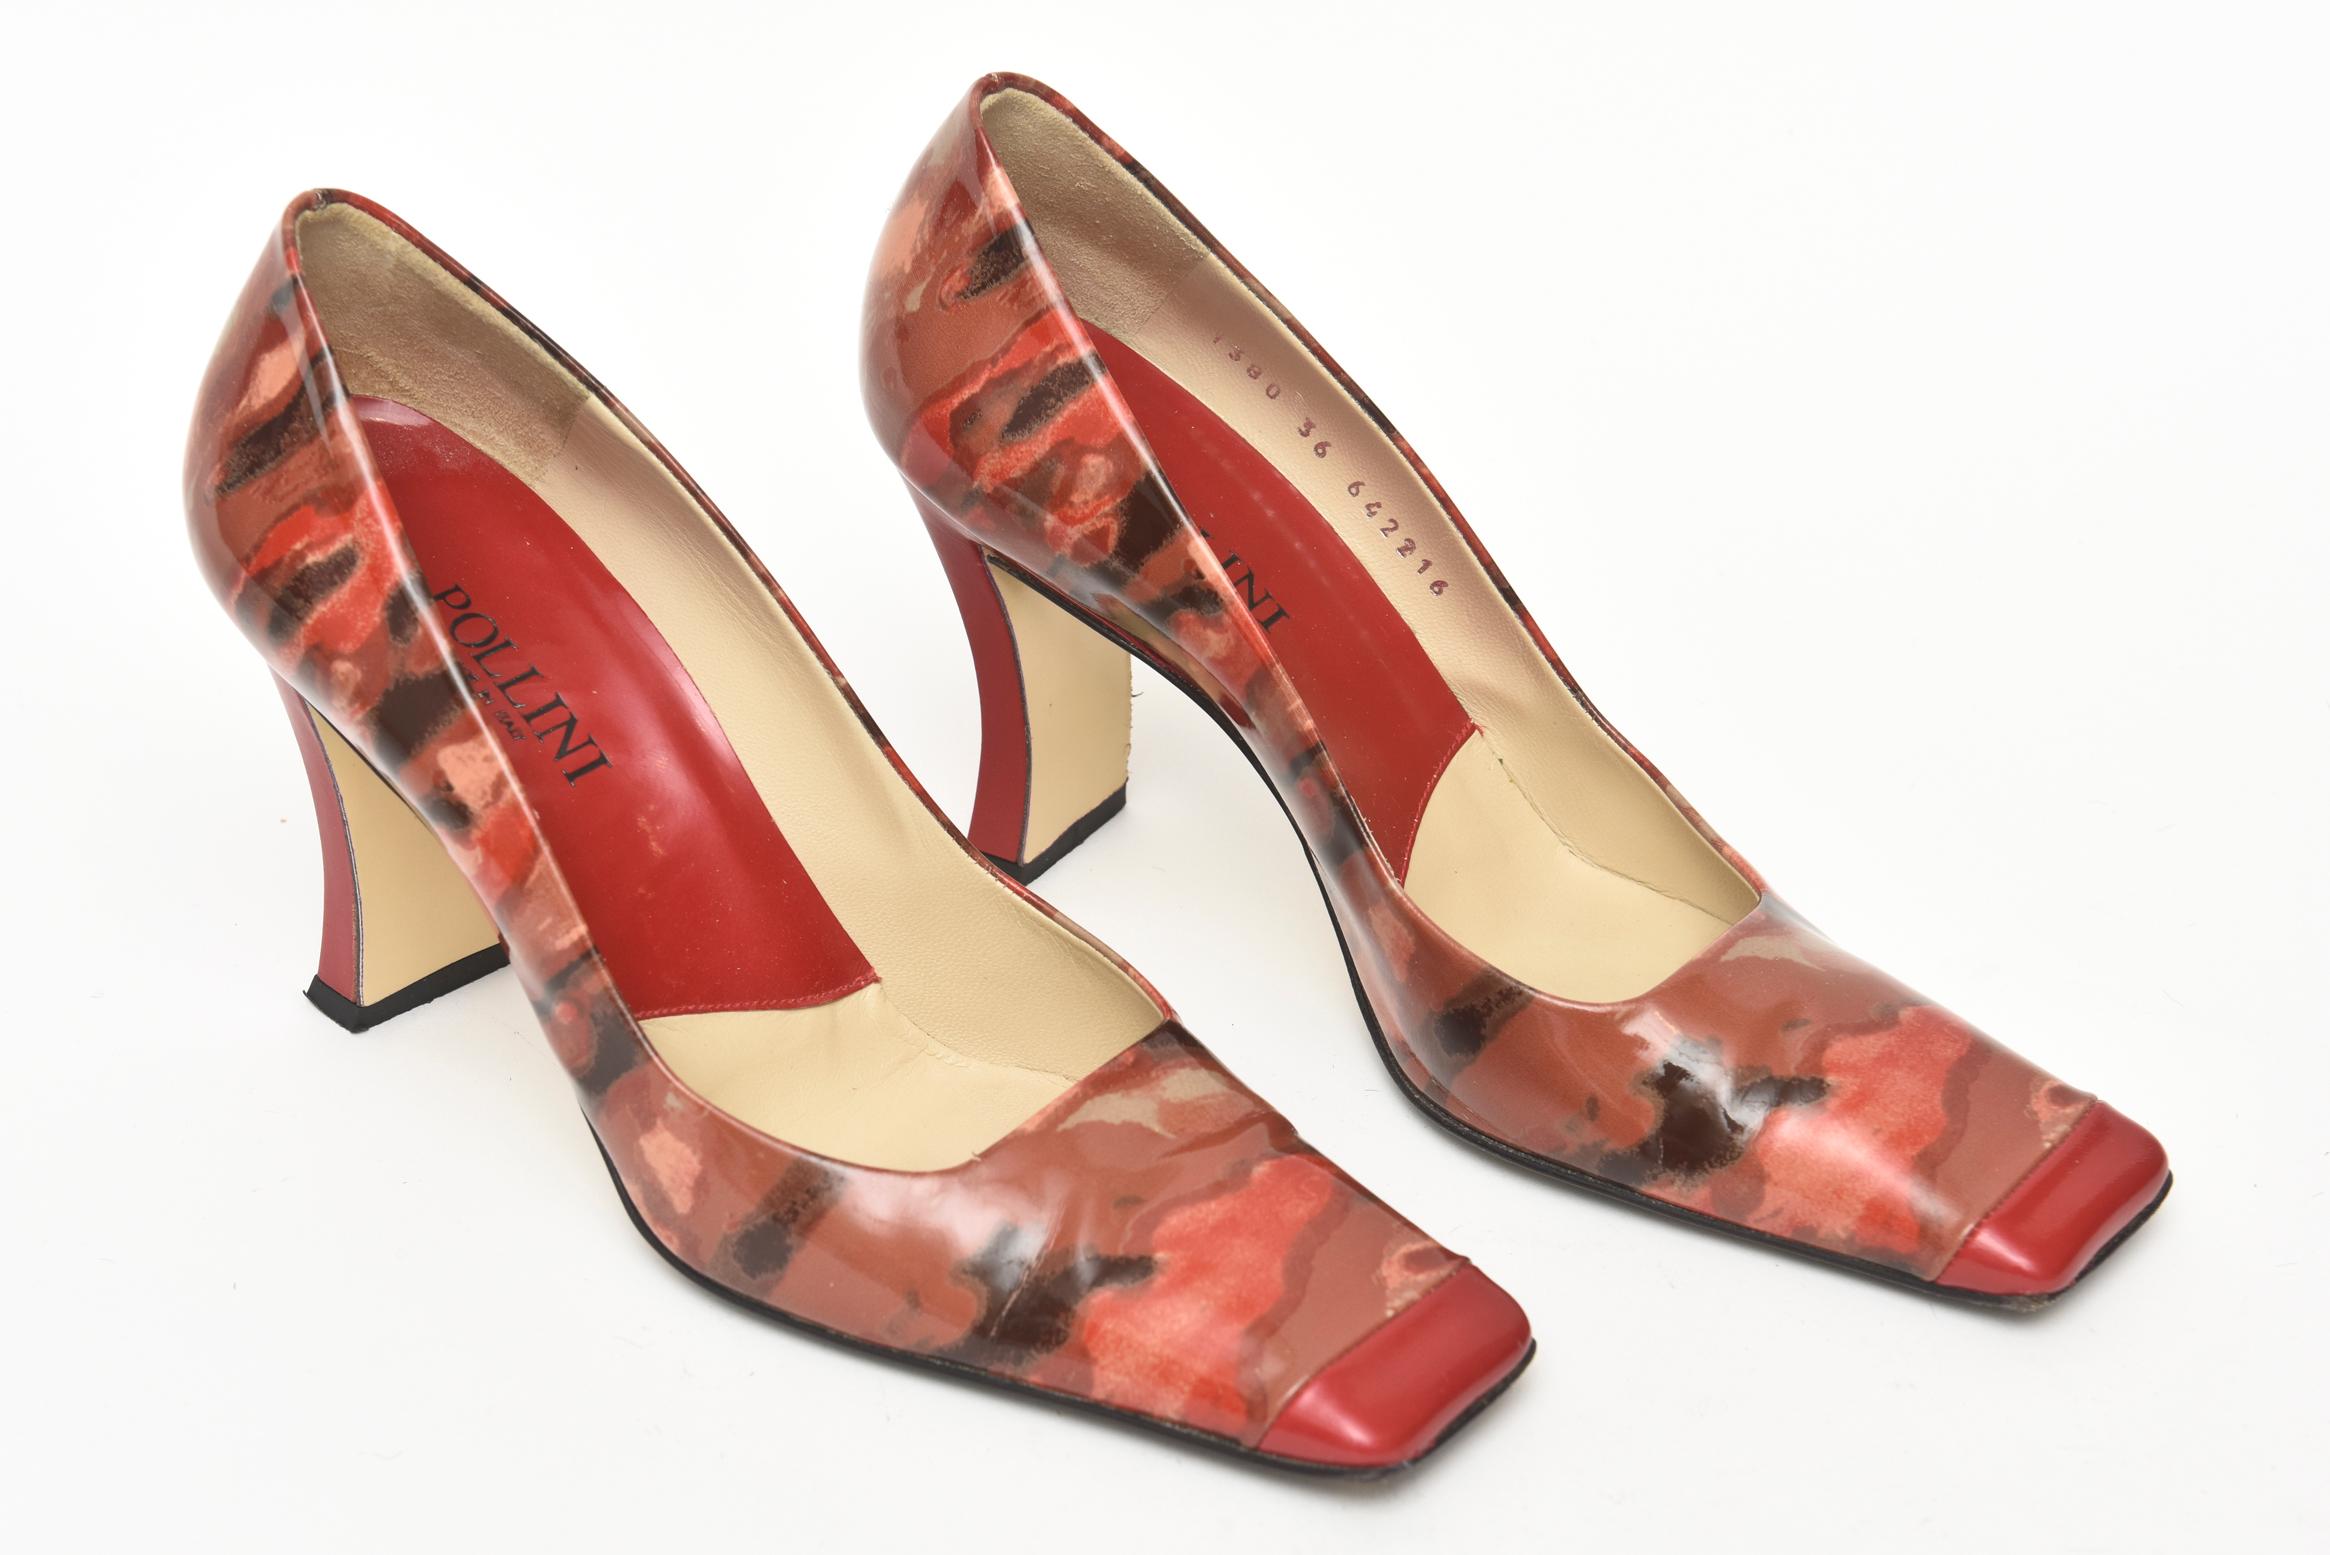 These pair of sexy graphic printed patent leather square toe heels are italian and from the company called Pollini Their 3 inch heel is a sculpted indentation and very au courant. It looks like a great abstract painting on a shoe. Gorgeous color and